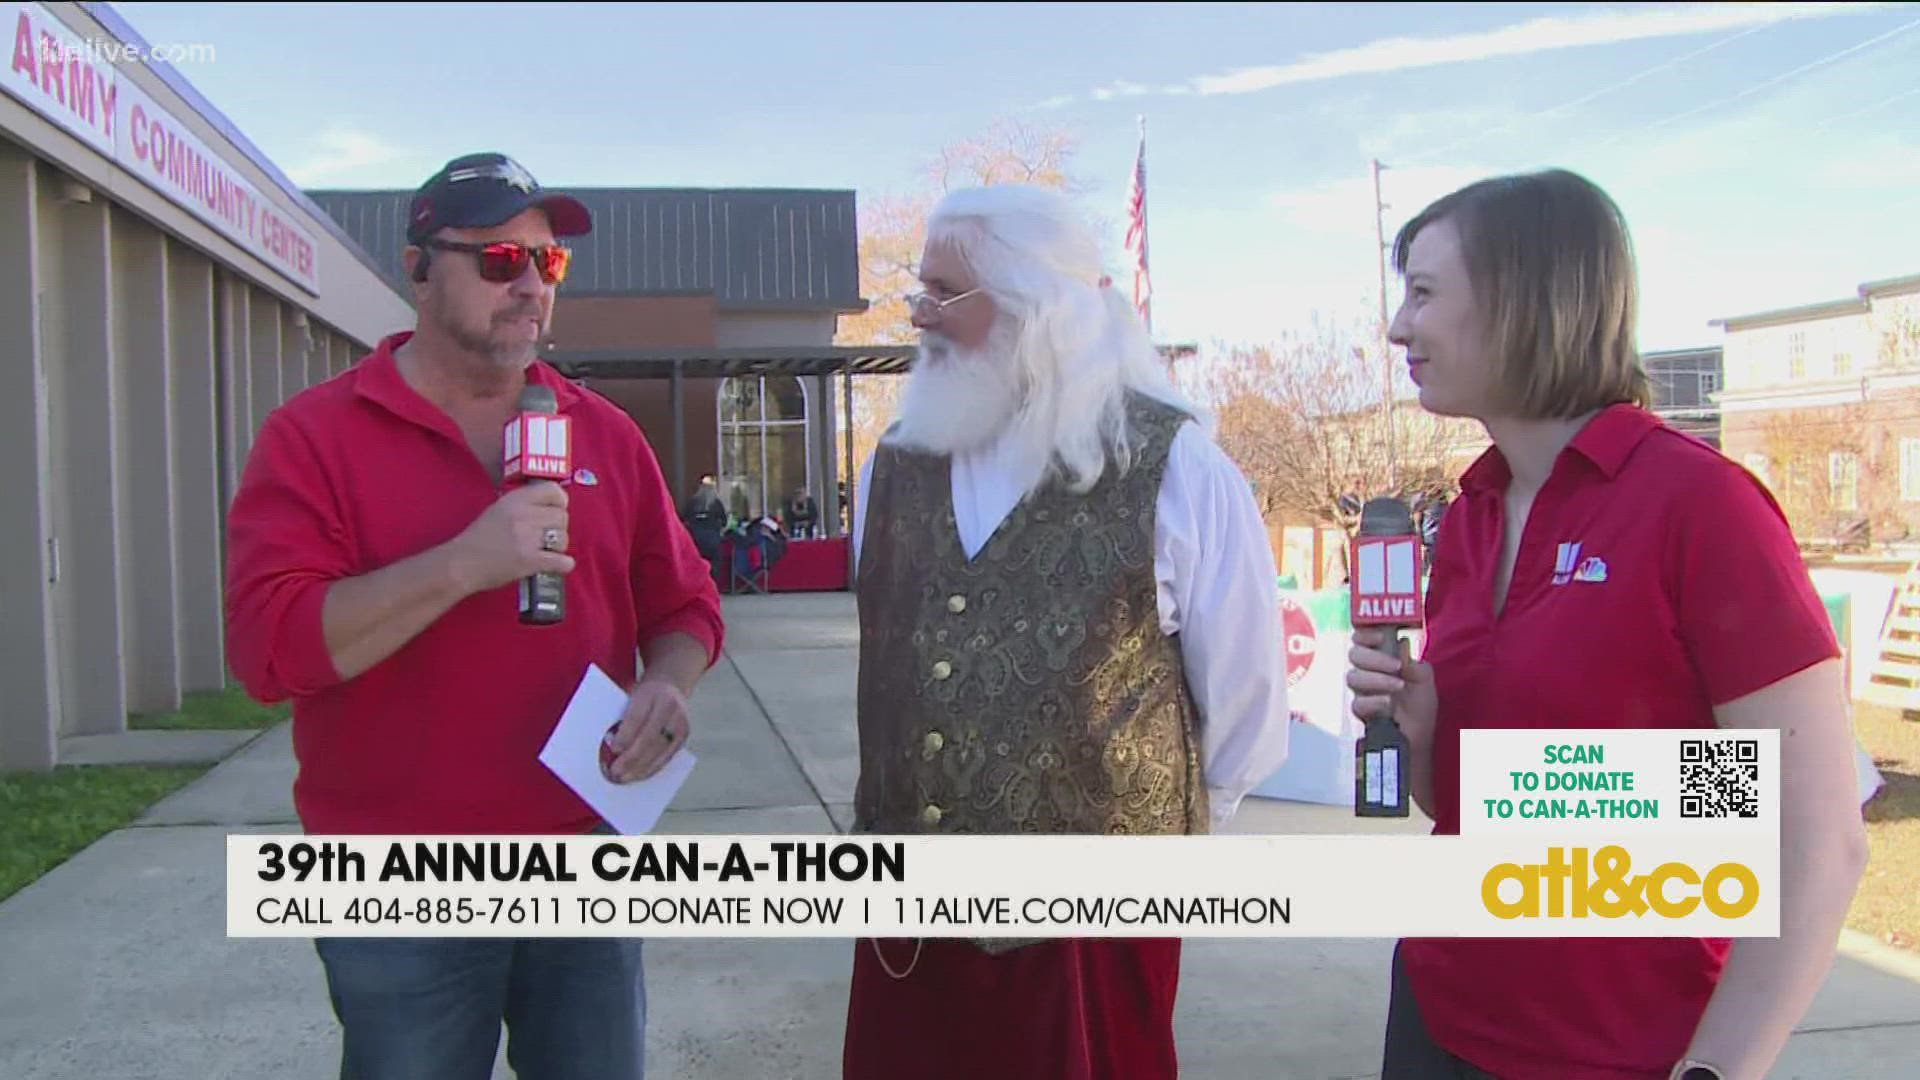 Join us for the 39th Annual Can-A-Thon! Call 404-885-7611 or donate one of our three drop-off sites.